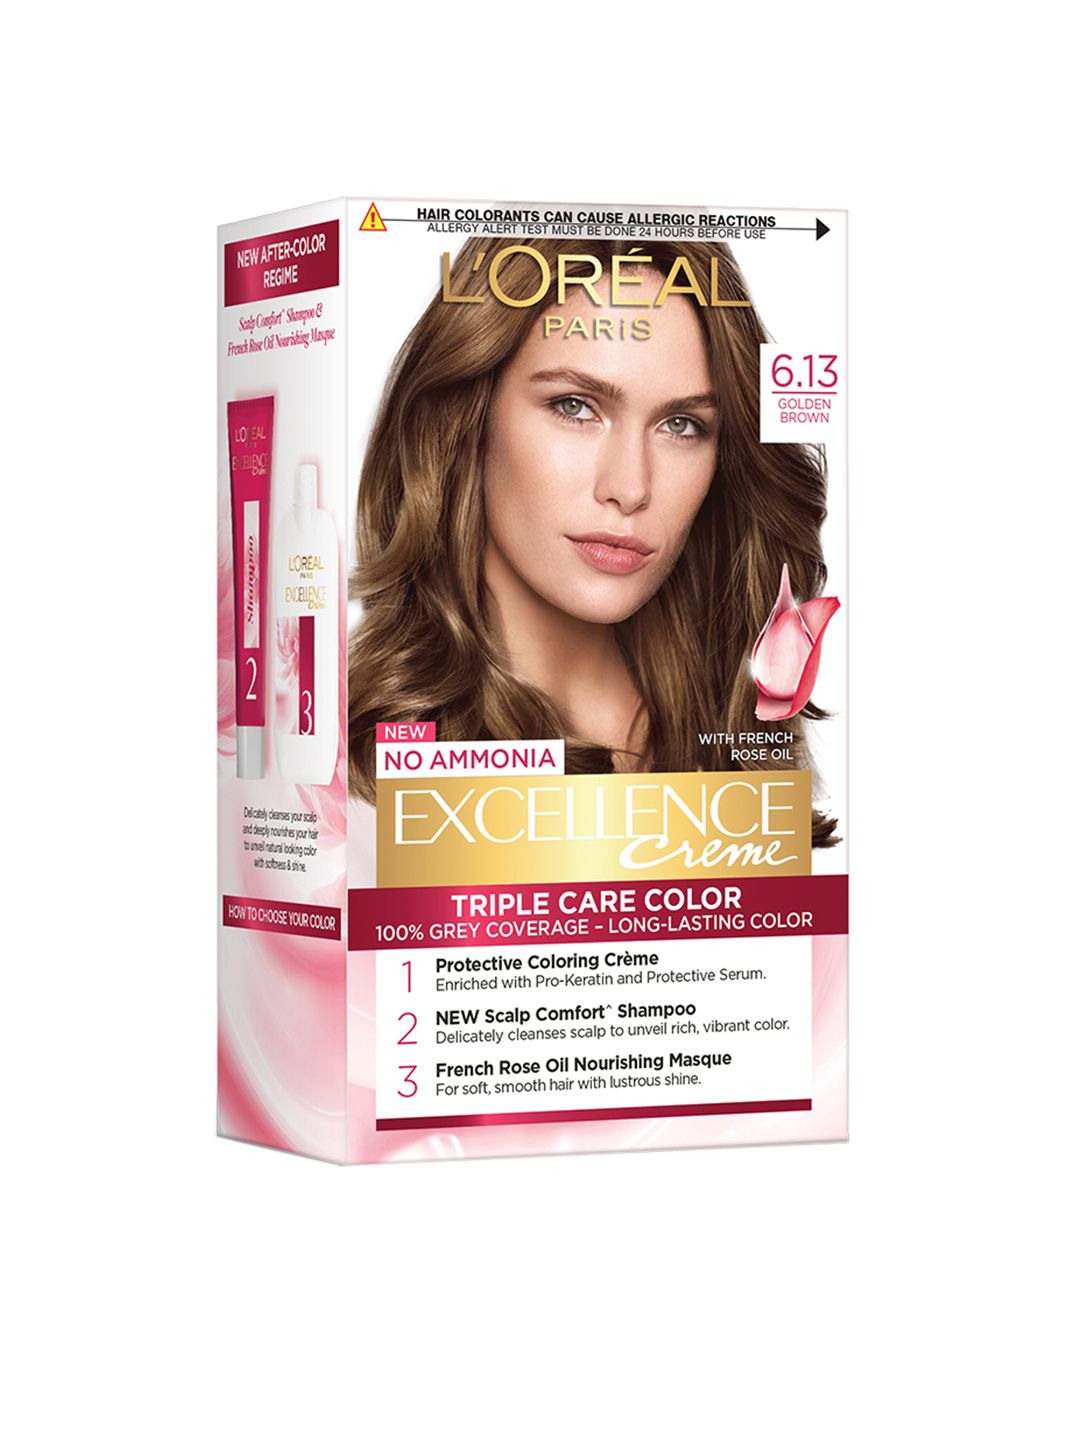 LOreal Paris Excellence Creme Triple Care Hair Color - Golden Brown 6.13 72ml+100g Price in India